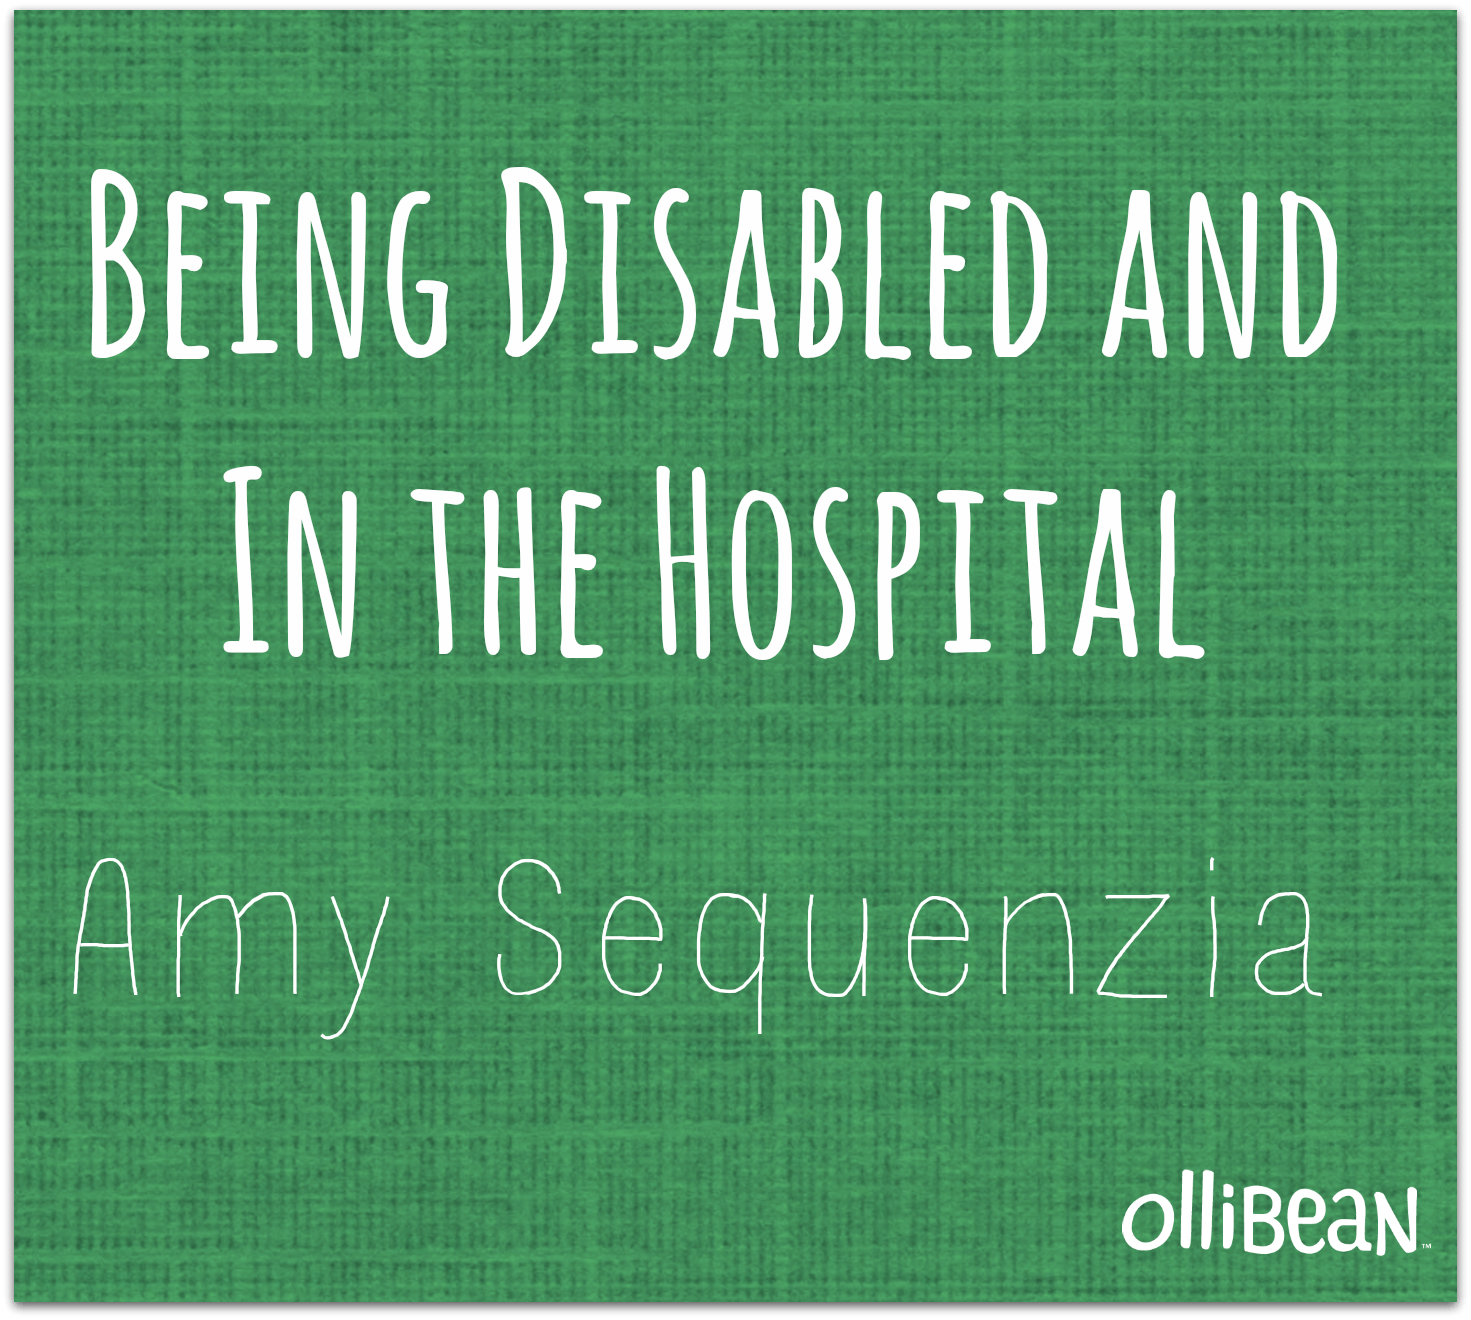 Green square with white handwritten font "Being Disabled & In the Hospital" underneath this in smaller font "Amy Sequenzia" in bottom right hand corner "ollibean".